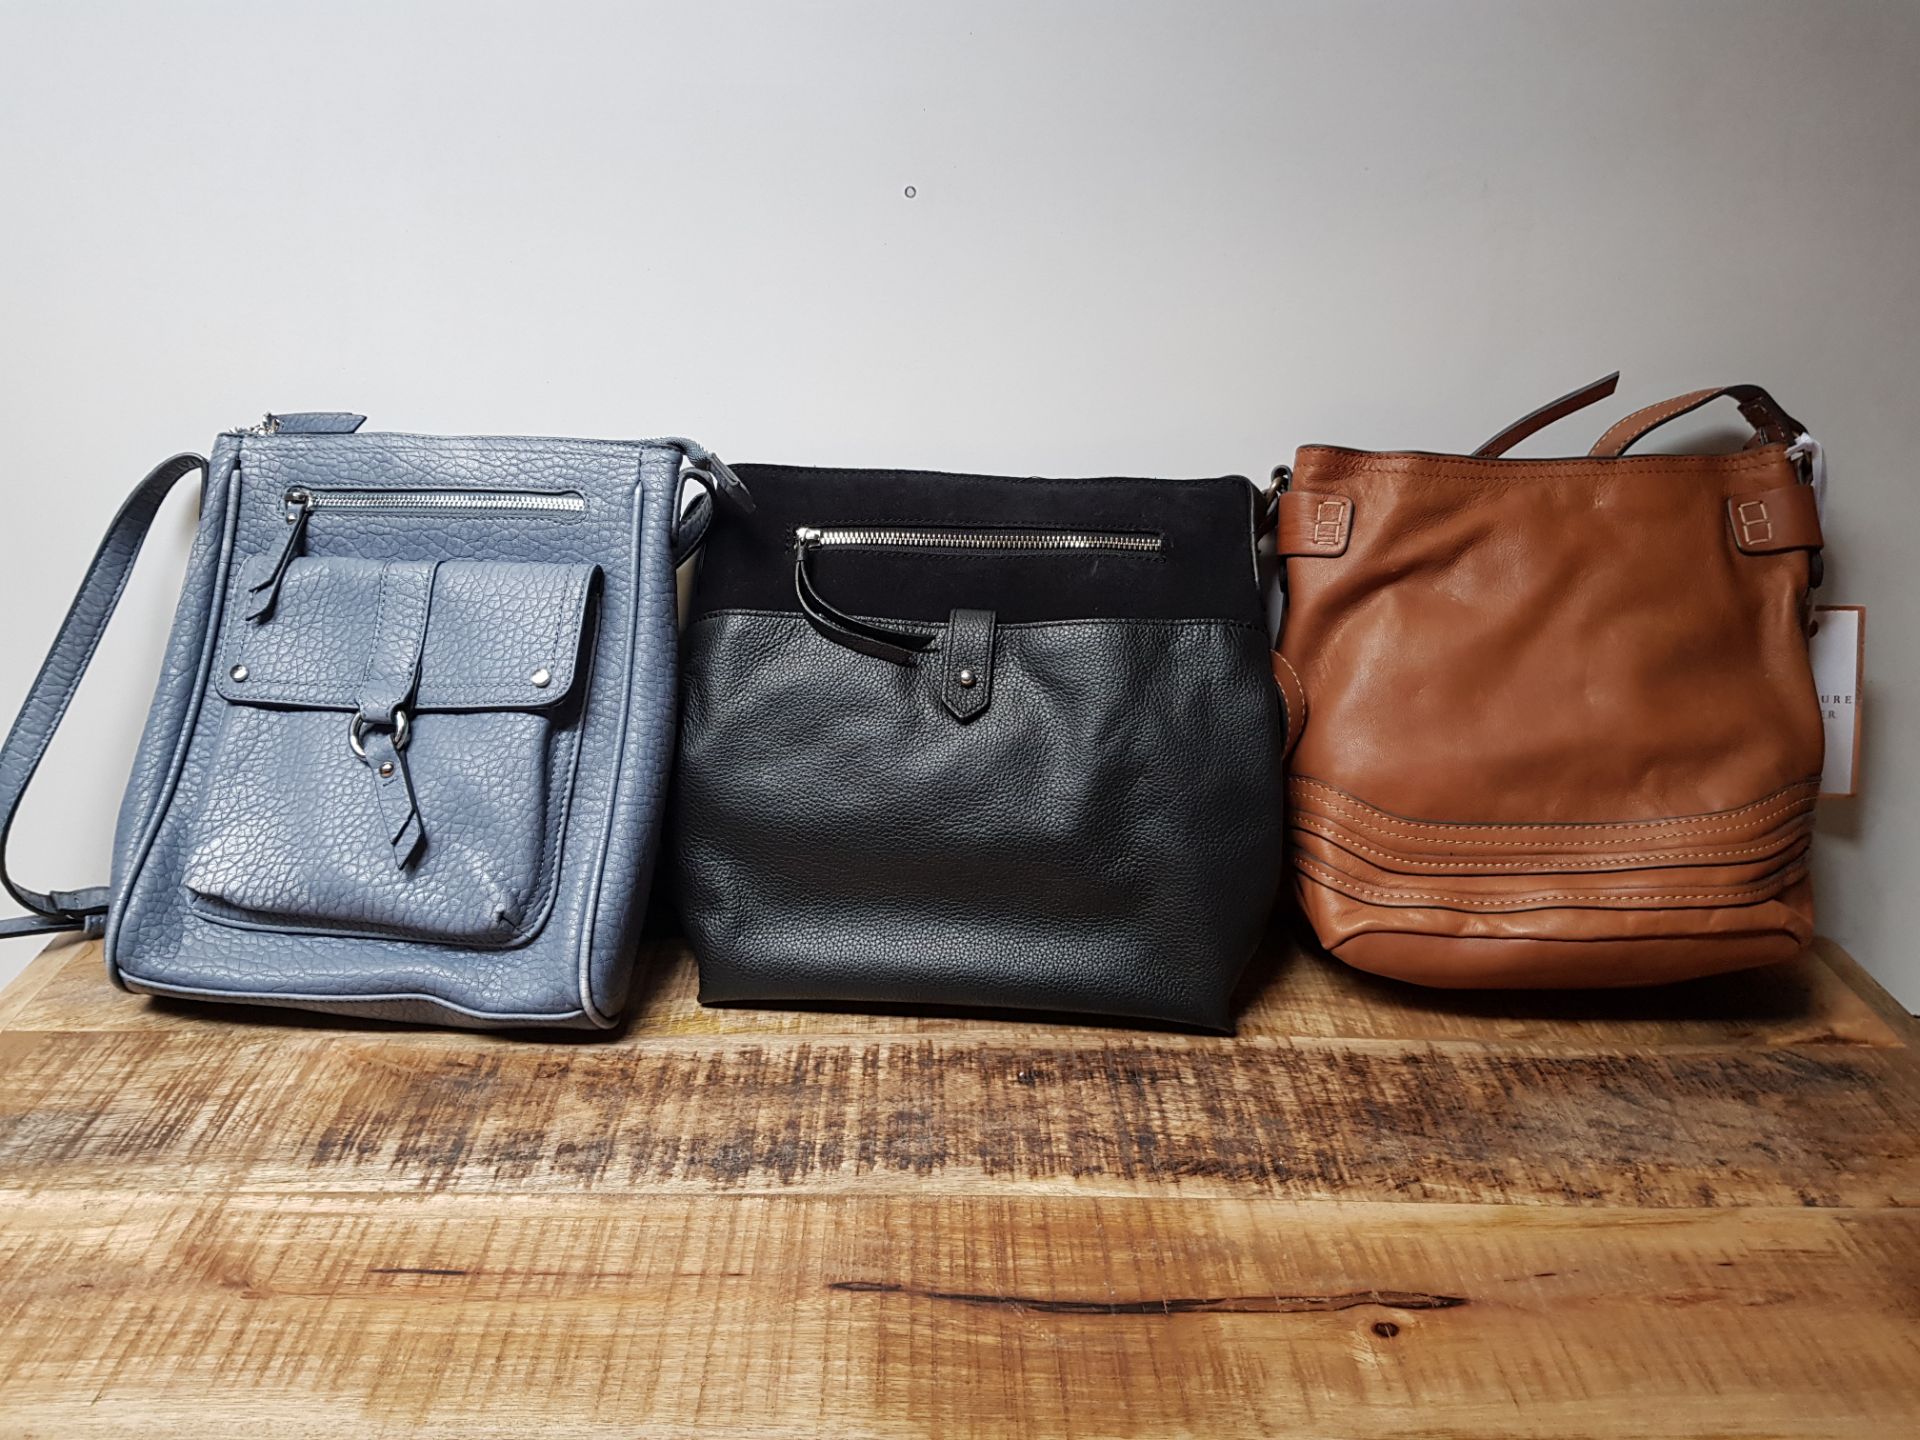 X 3 NEXT BAGS TO INCLUDE SIGNATURE LEATHER TAN BAG, BLUE OVER SHOUDLER + BLACK OVER SHOULDER